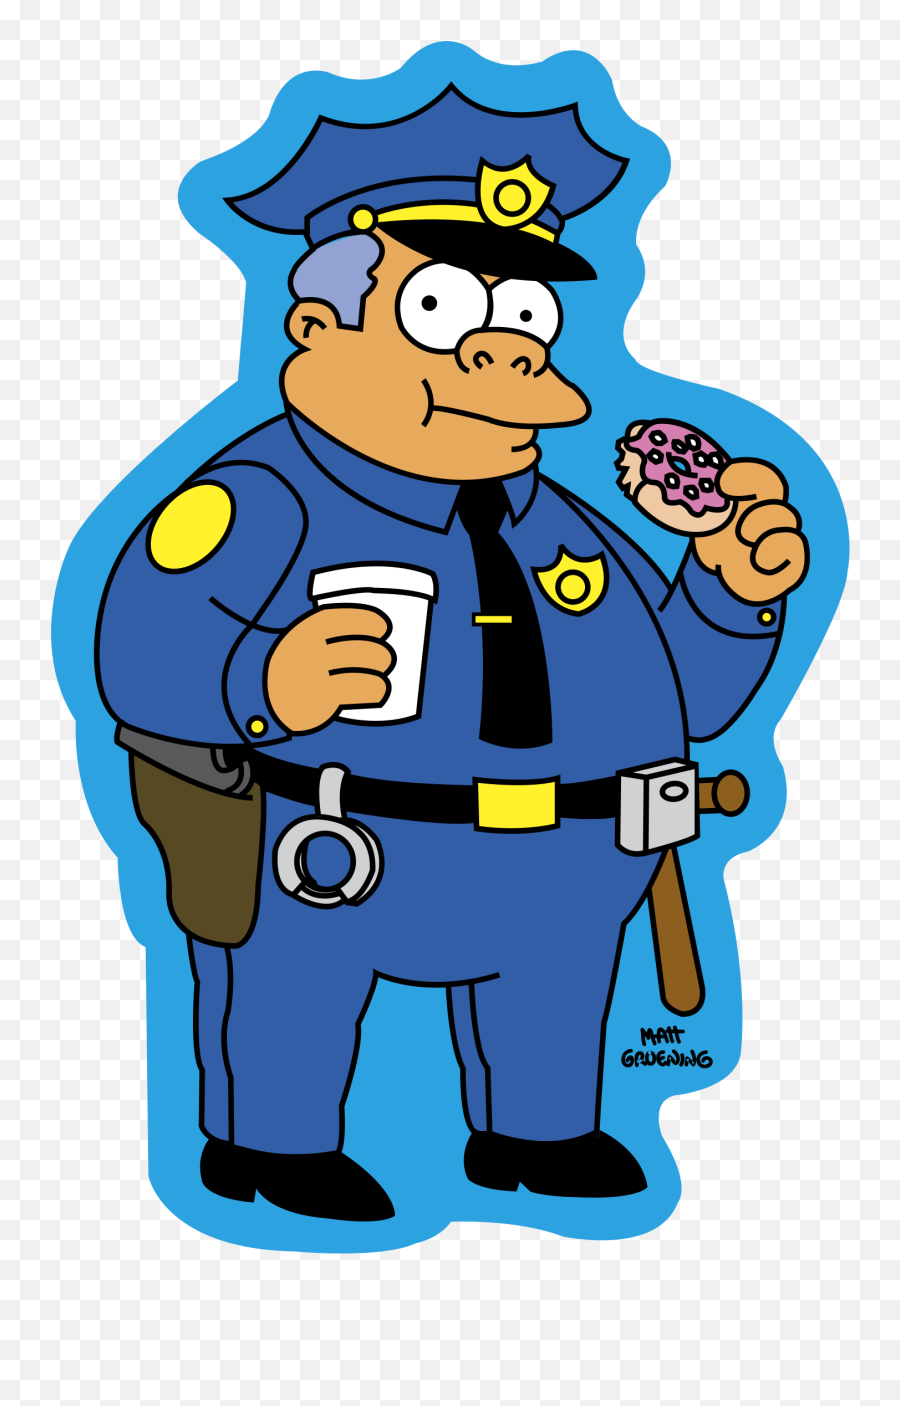 The Simpsons Logo Png Transparent U0026 Svg Vector - Freebie Supply Chief Wiggum Png,Simpsons Png